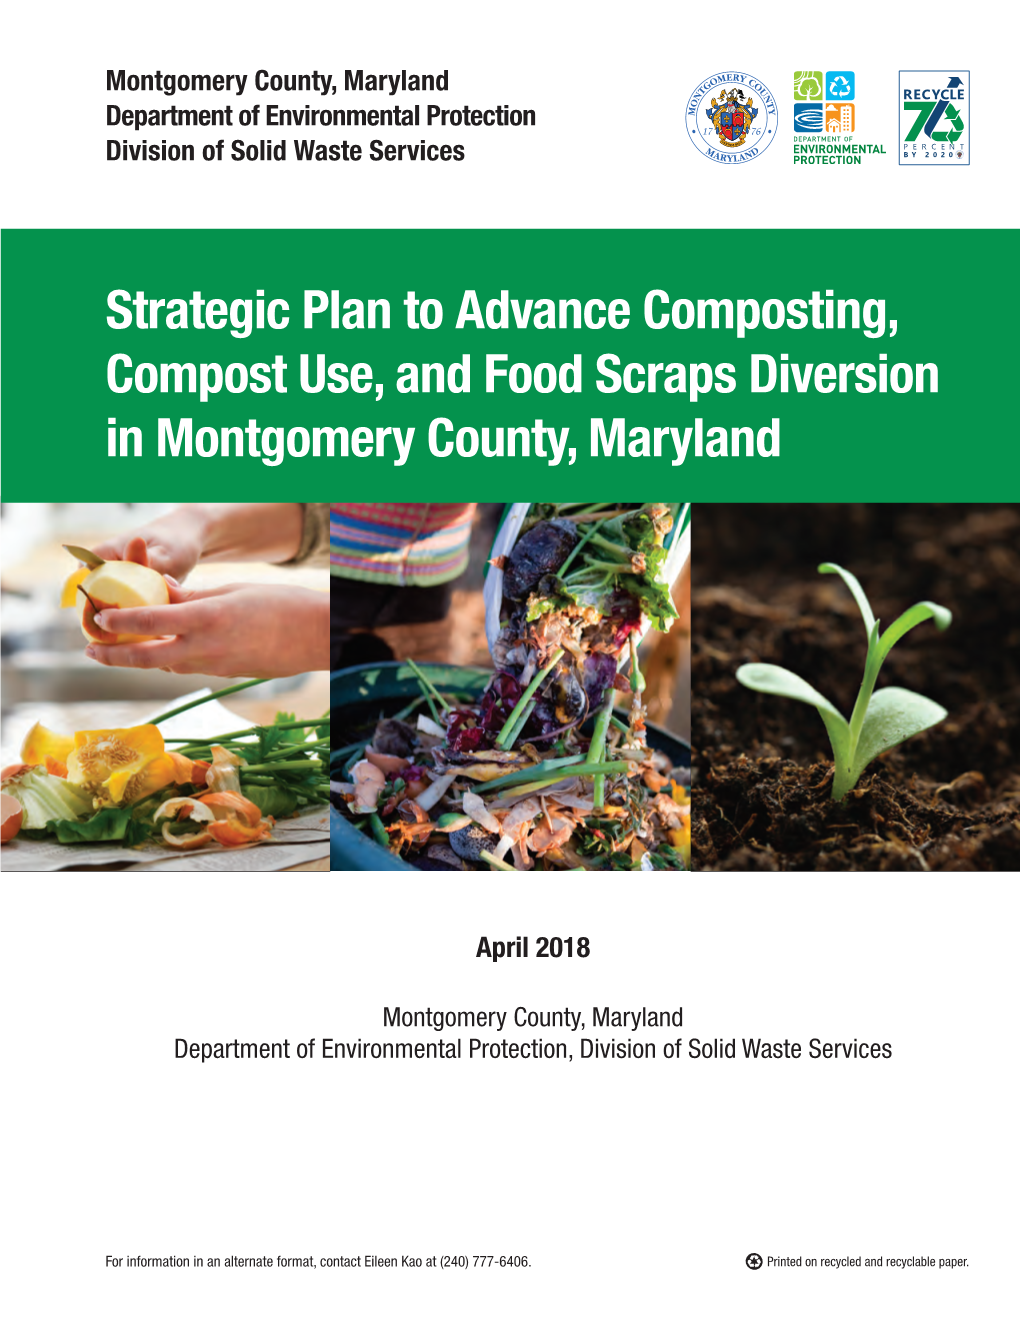 Strategic Plan to Advance Composting, Compost Use, and Food Scraps Diversion in Montgomery County, Maryland